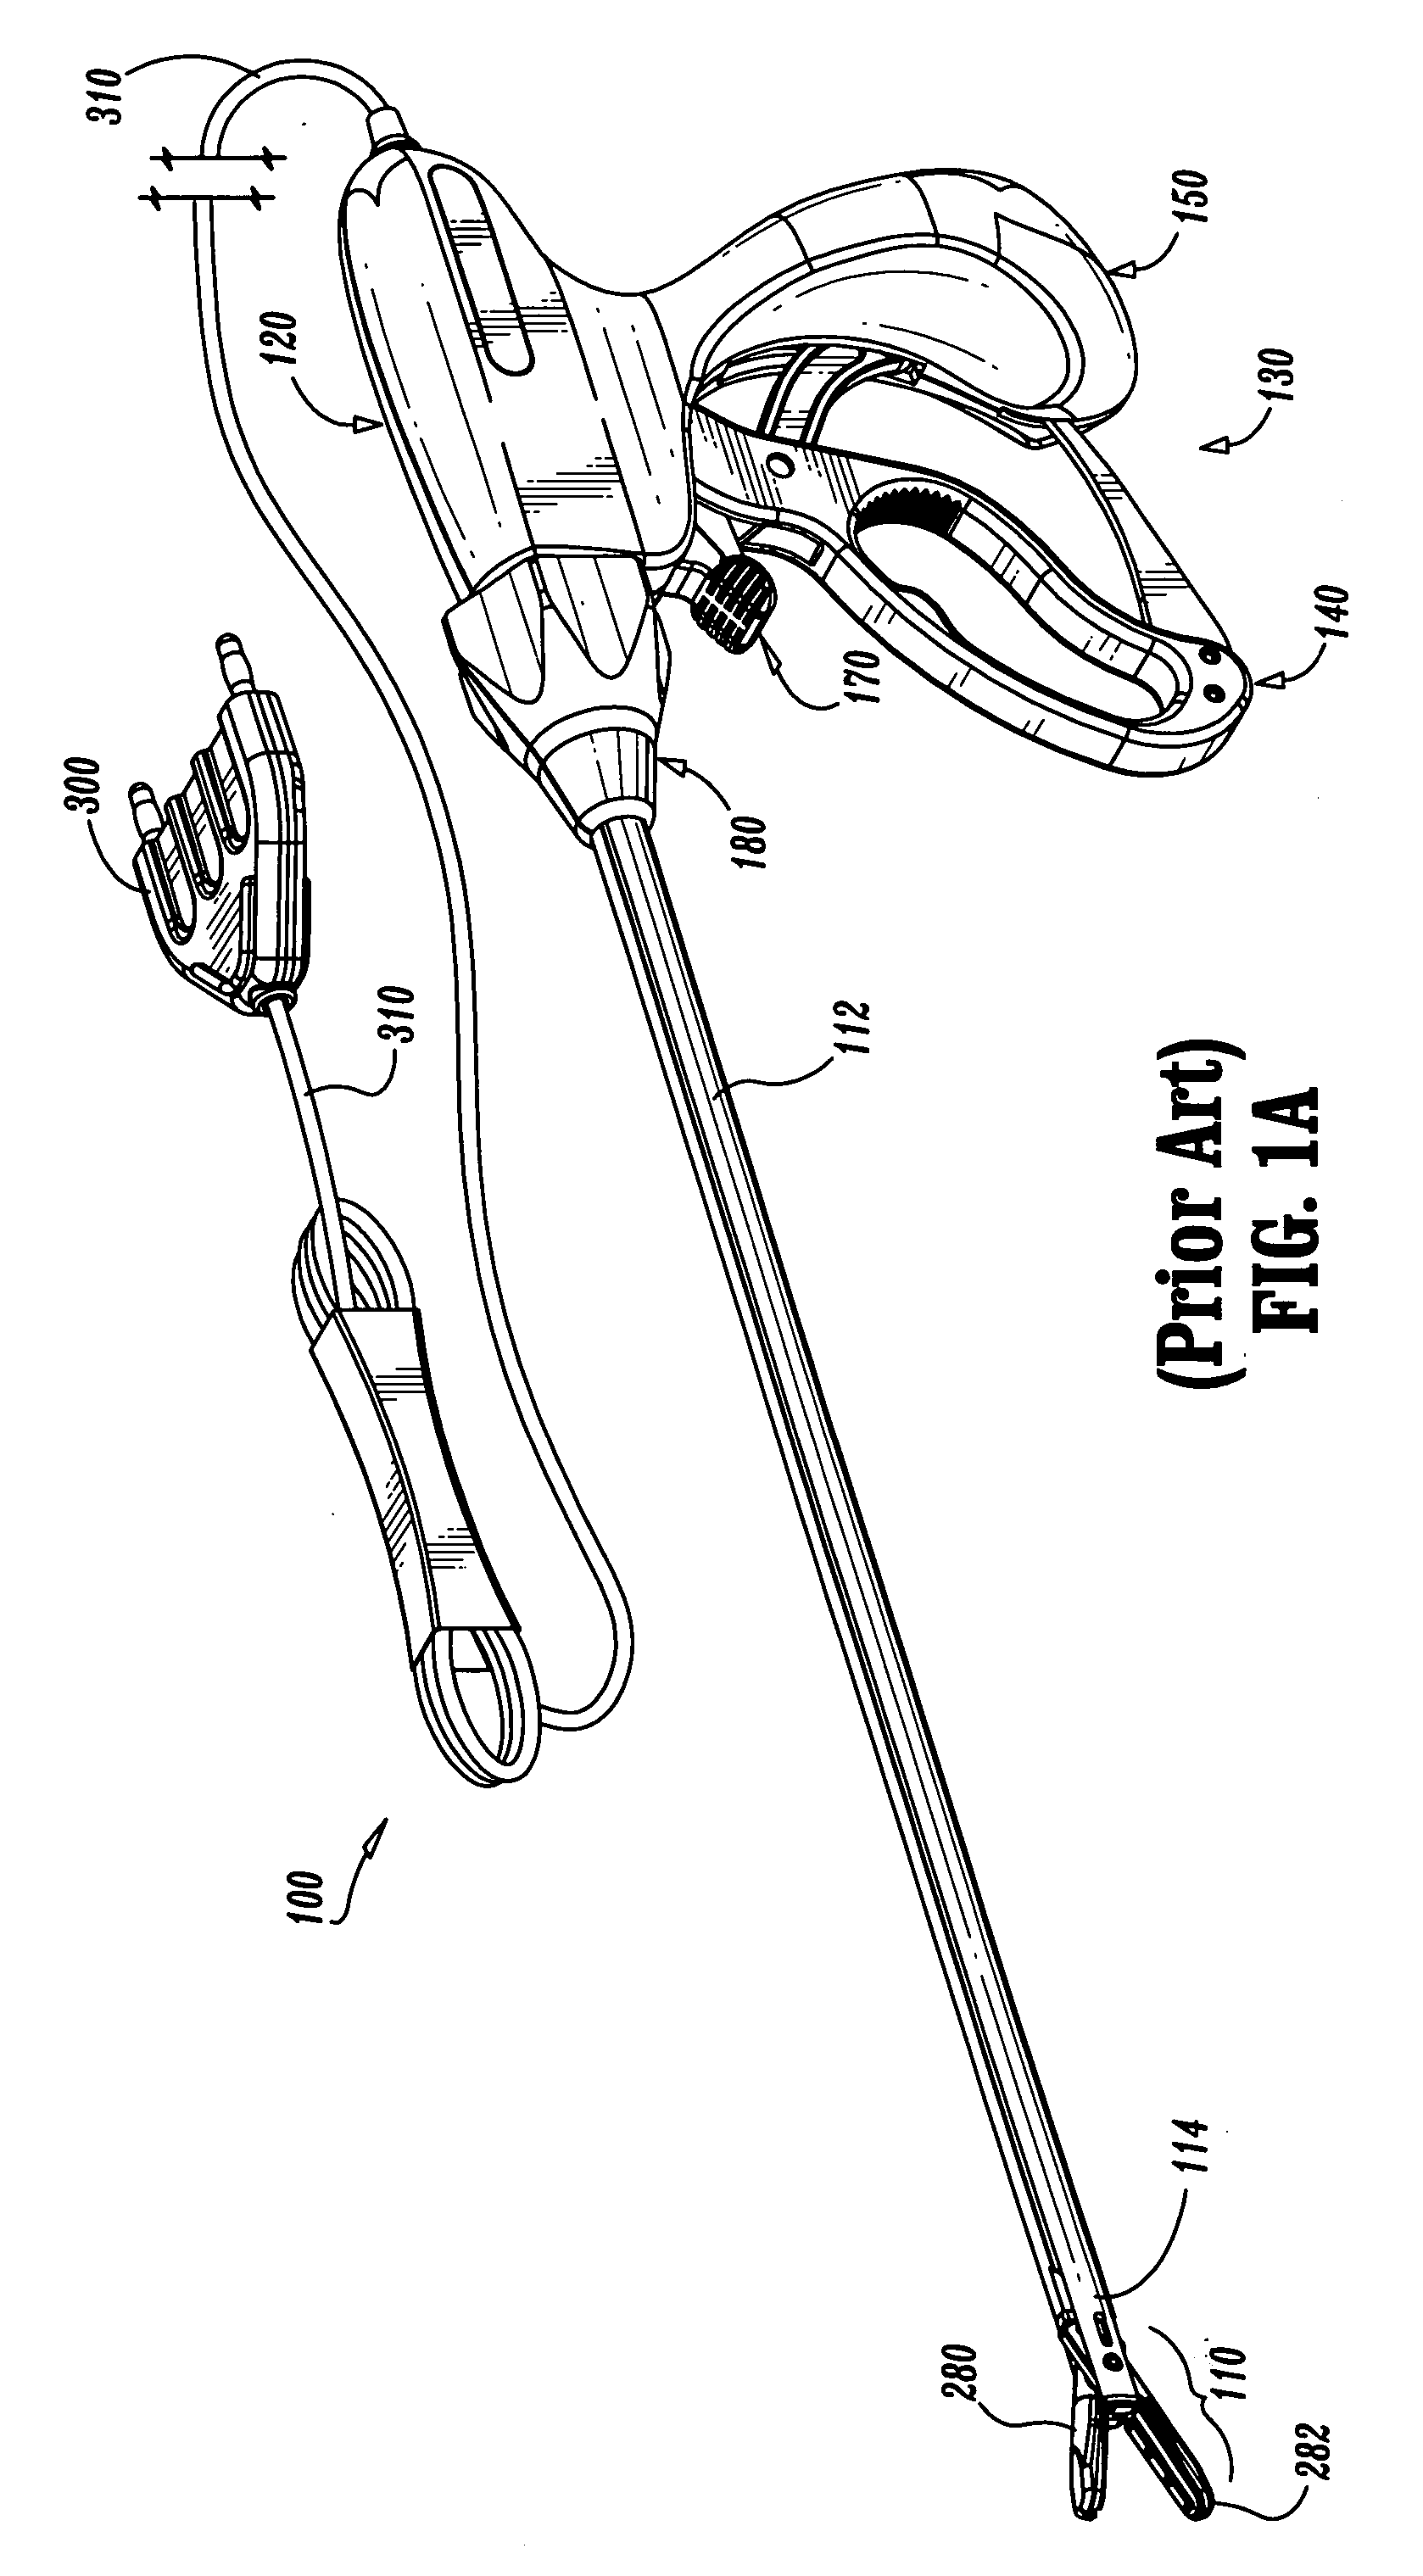 Electrically conductive/insulative over-shoe for tissue fusion